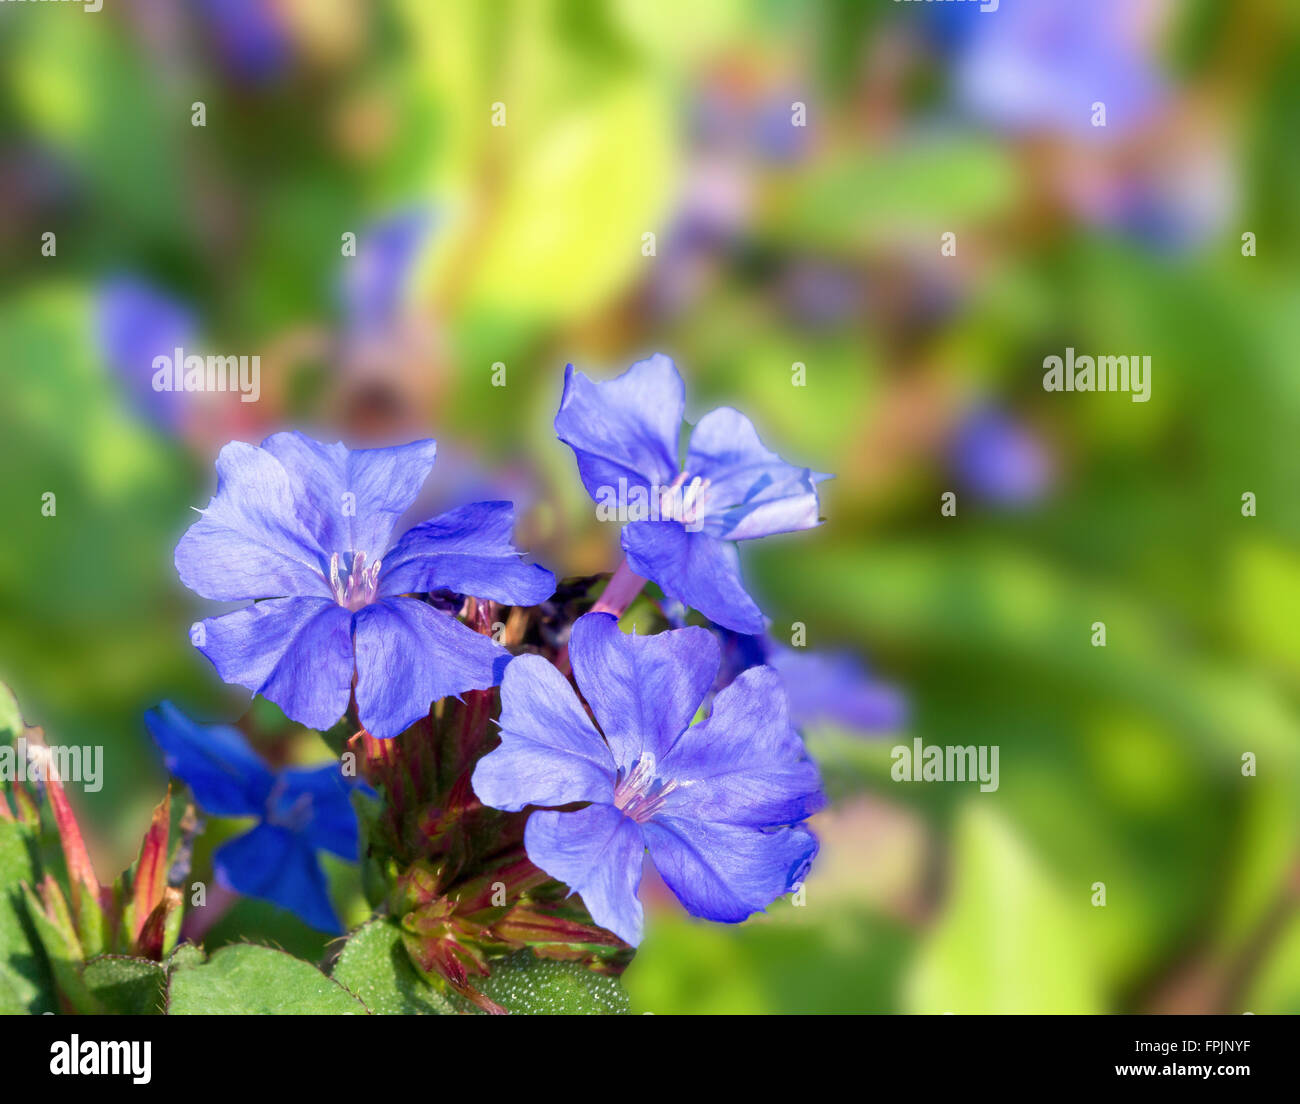 Macro of Leadwort flowers against a blurred green leaf background Stock Photo